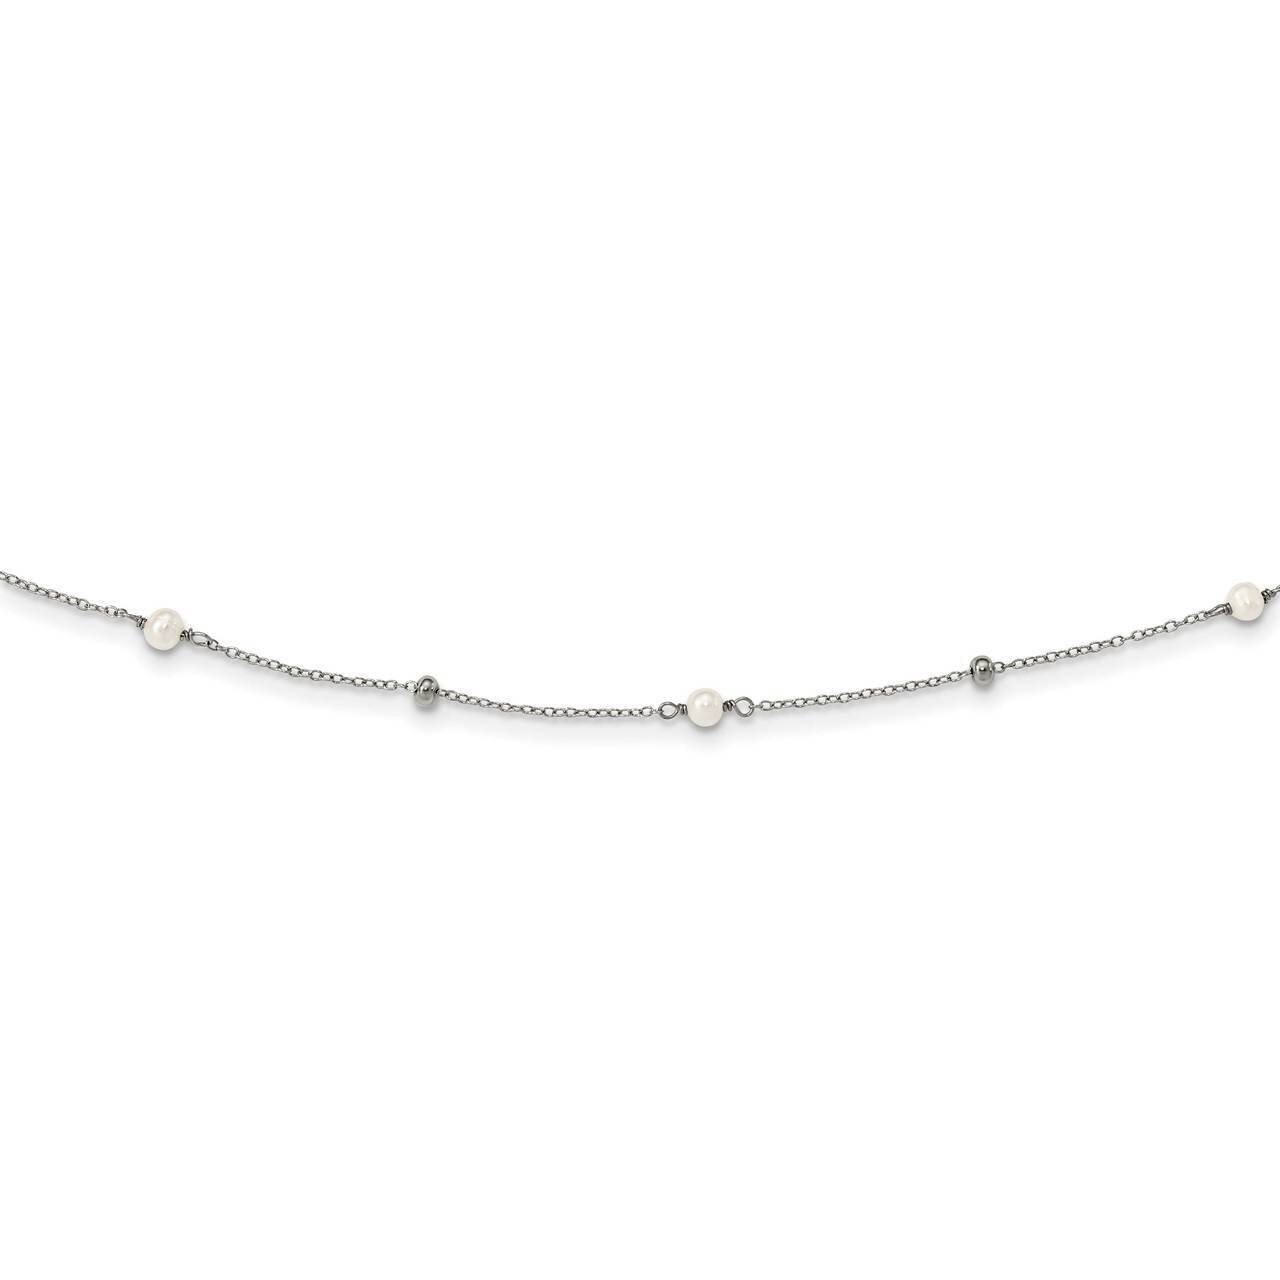 Beads & Freshwater Cultured Pearl Necklace Sterling Silver Polished QG5329-36